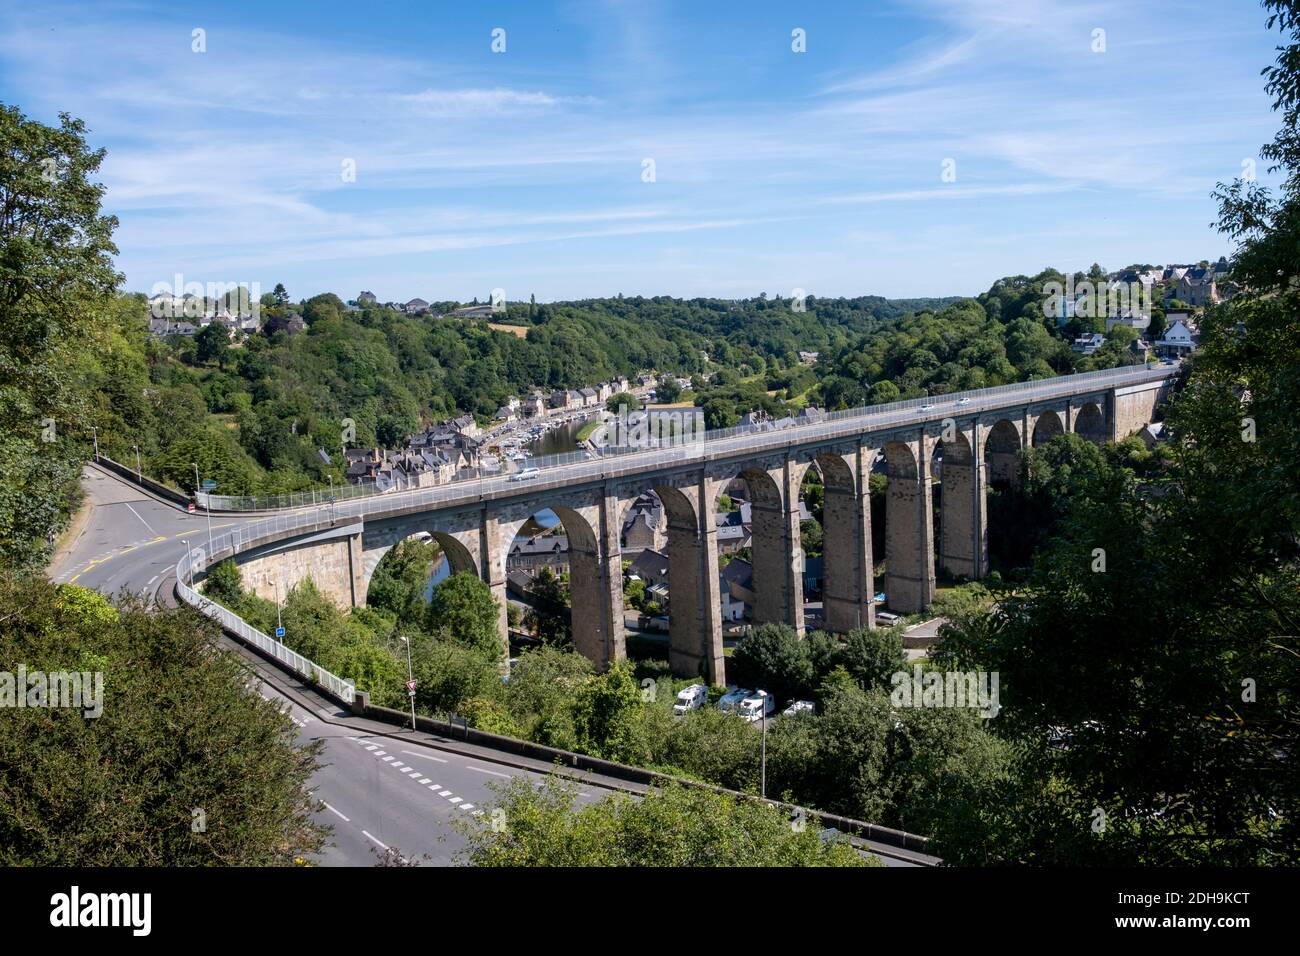 Dinan (Brittany, north-western France): overview of the viaduct and the harbour on the banks of the River Rance Stock Photo